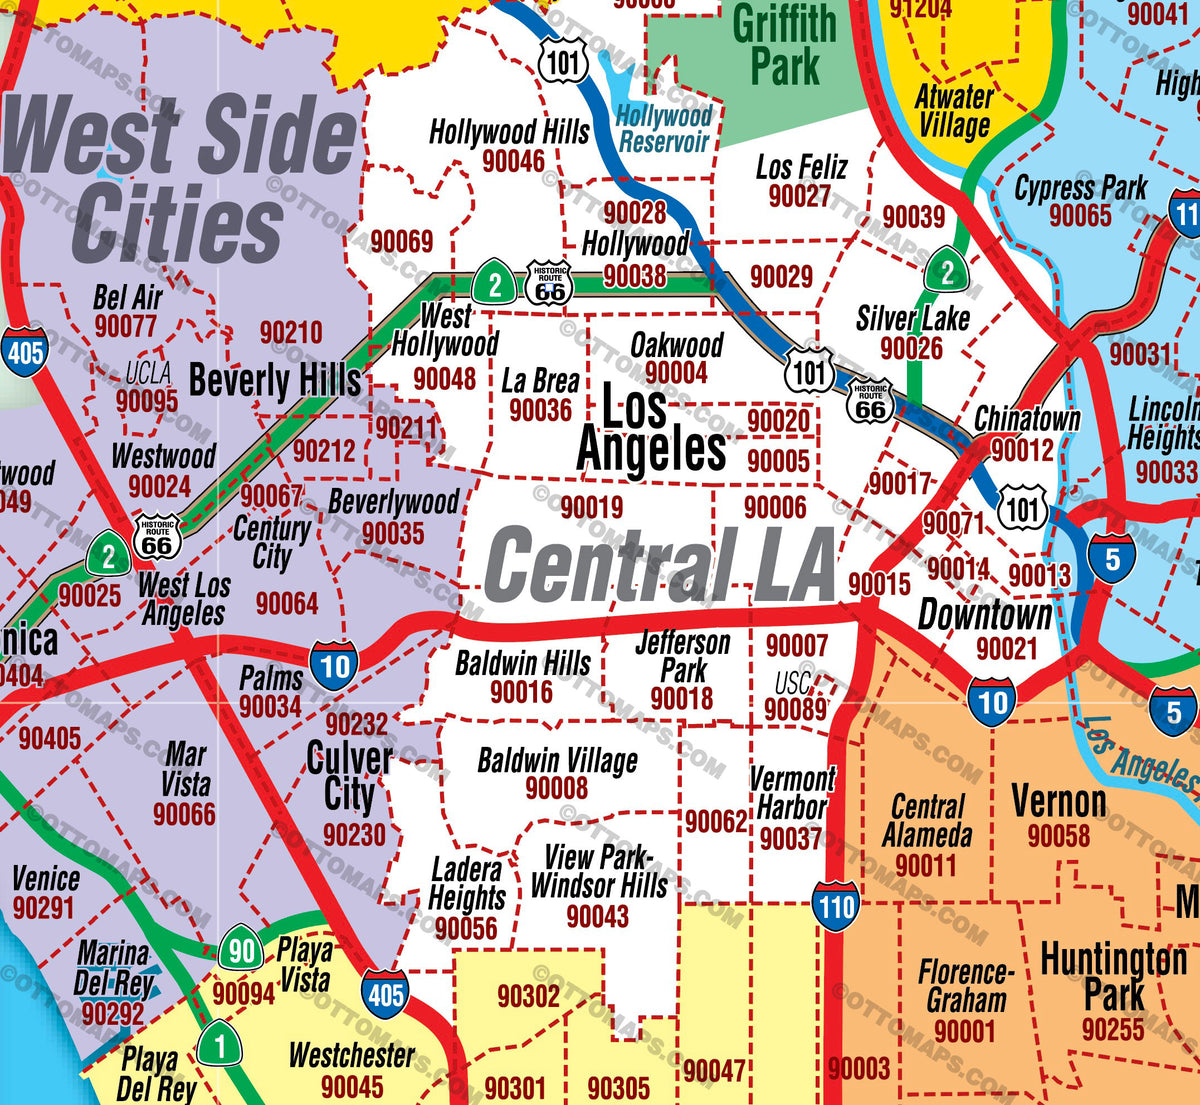 Los Angeles Zip Code Map - SOUTH (County Areas colorized) - Otto Maps